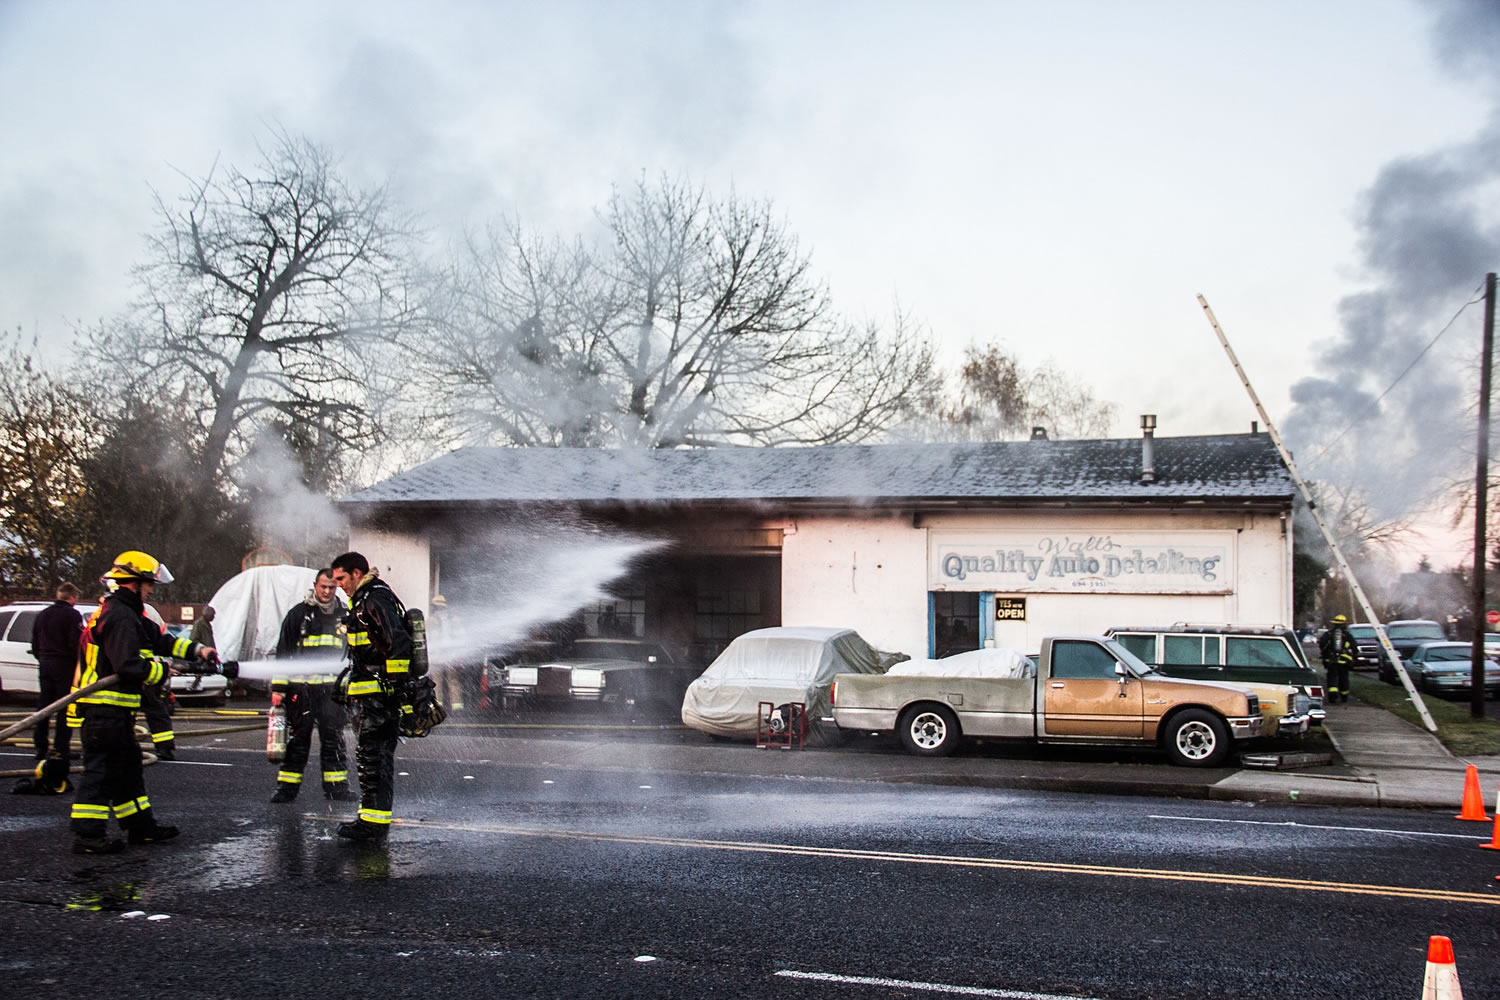 Emergency crews respond to a fire Sunday morning at Walt's Quality Auto Detailing on Main Street in Vancouver.